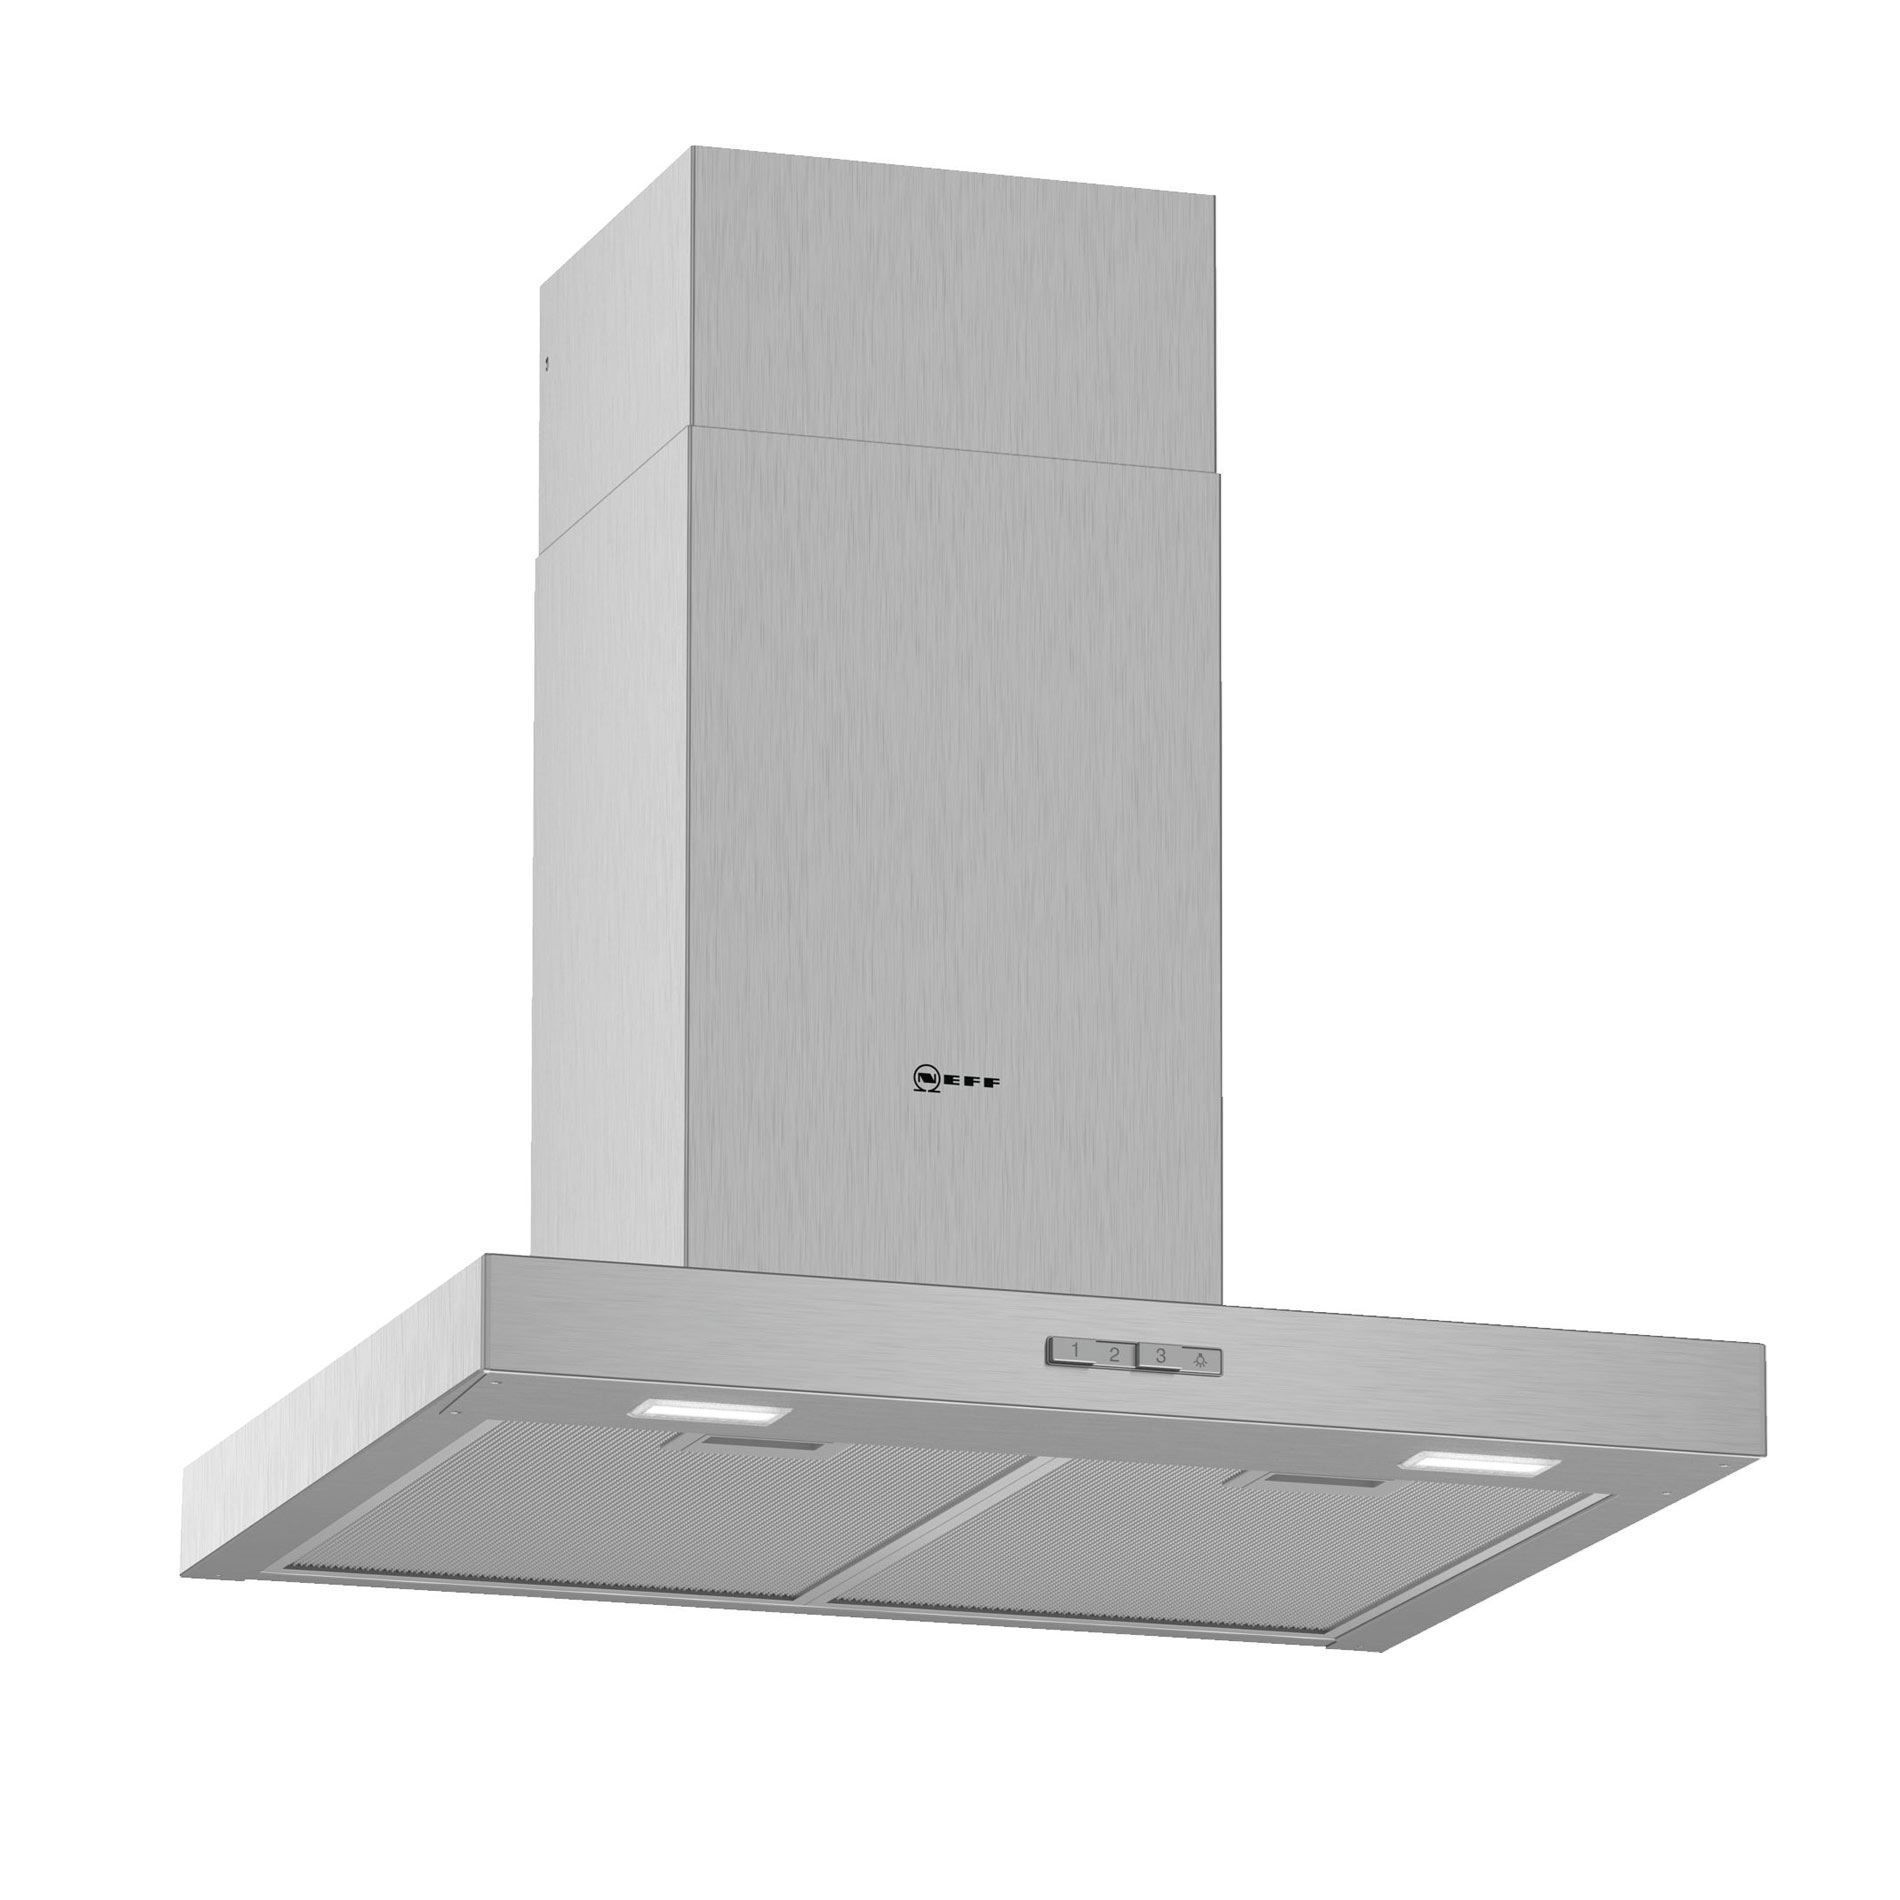 Picture of Neff D62BBC0N0B Stainless Steel Chimney Hood